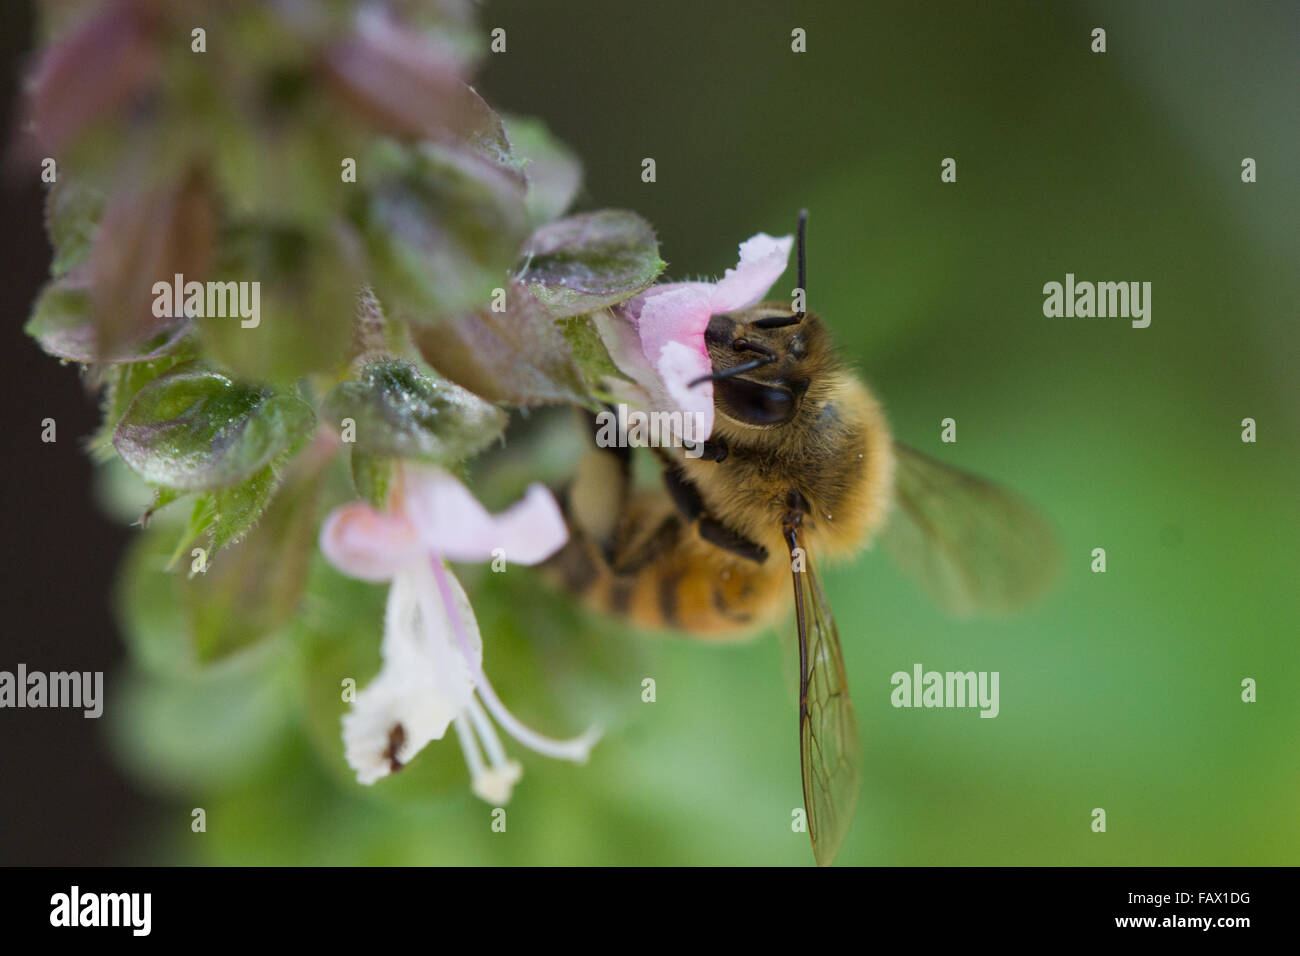 A bee, on its daily commute from flower to flower Stock Photo